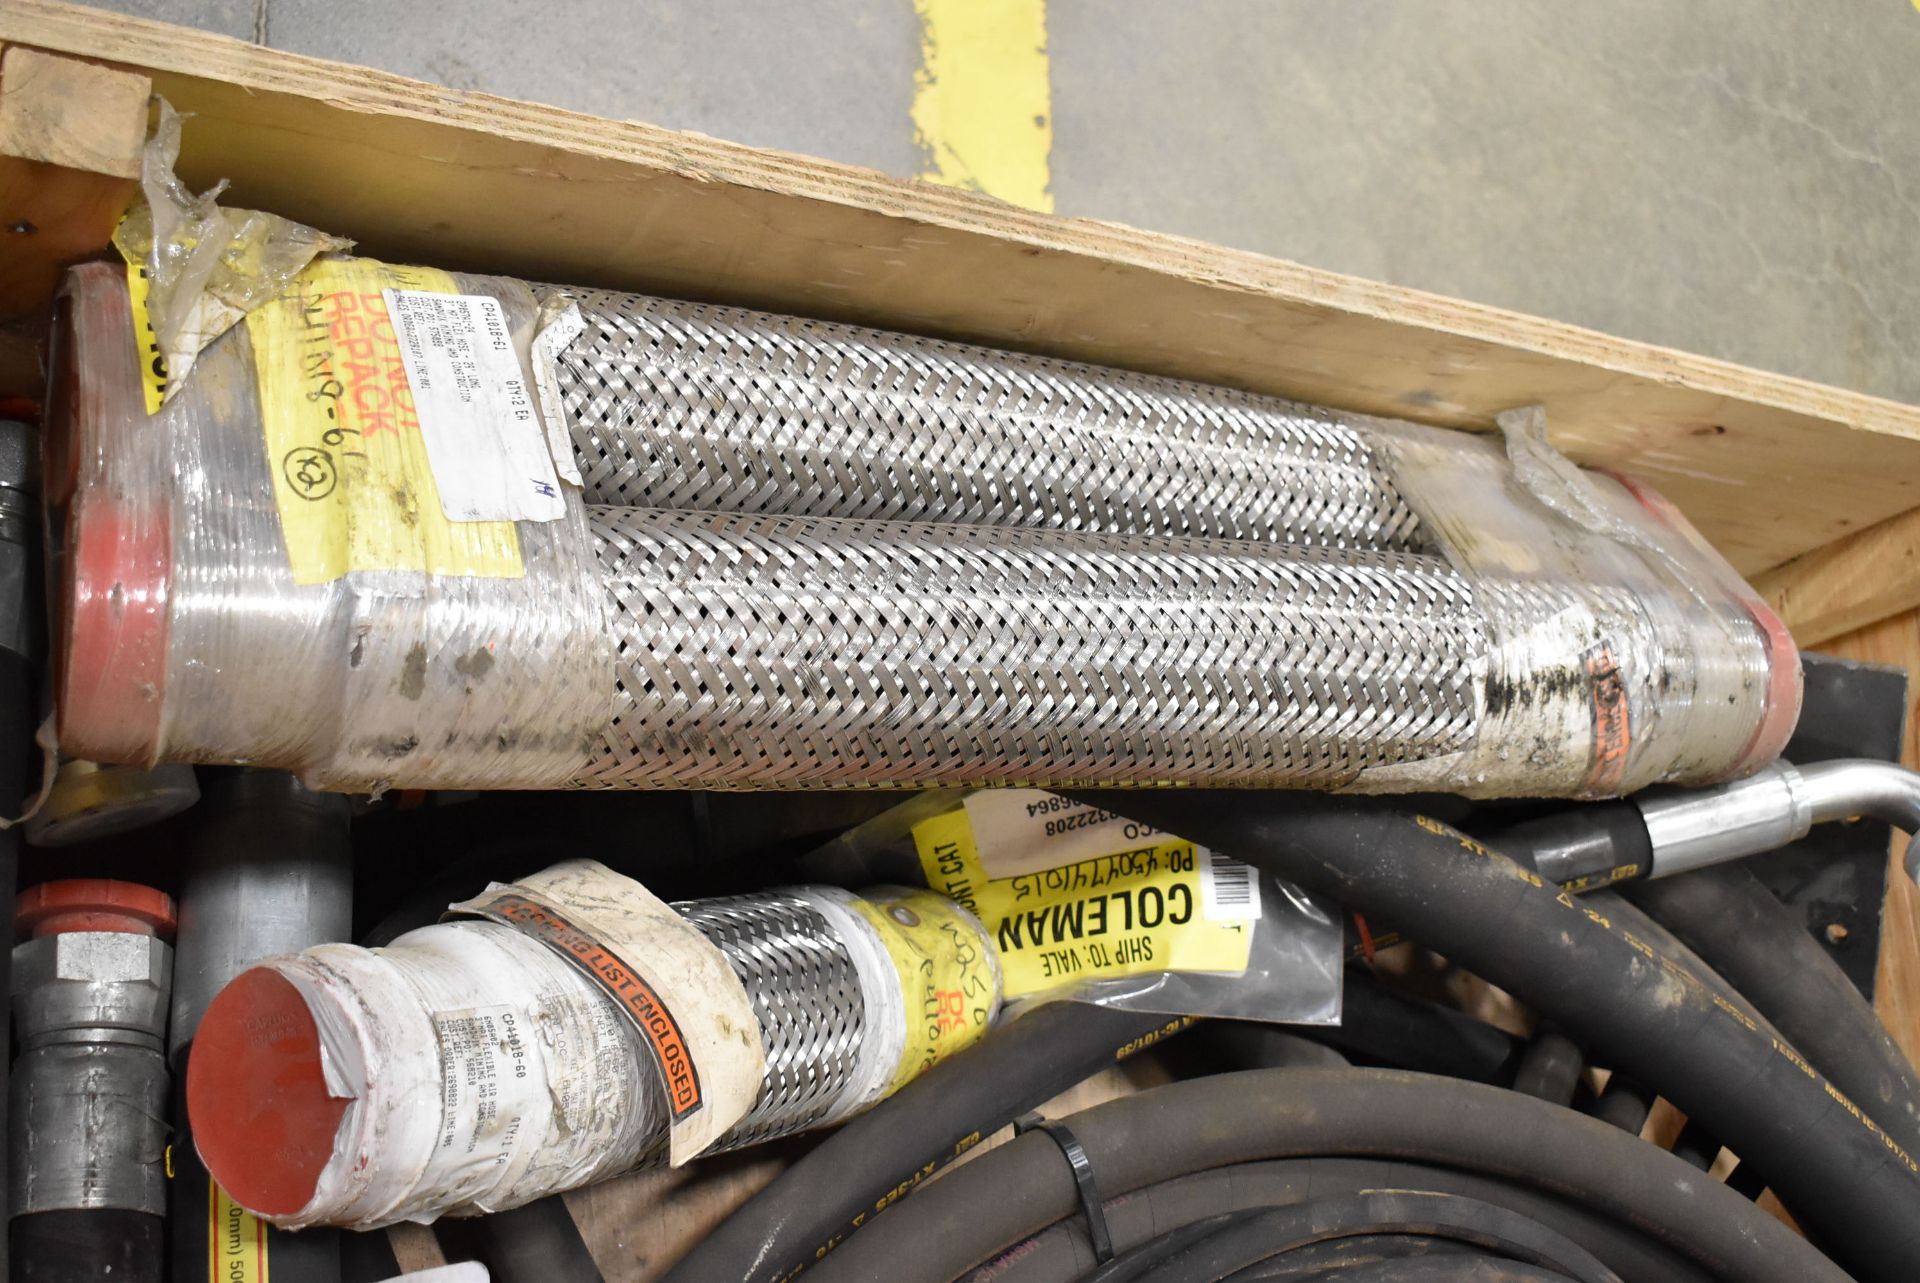 LOT/ SKID WITH CATERPILLAR HYDRAULIC LINES, BRAIDED STAINLESS STEEL HOSES, HOSES (CMD WAREHOUSE) [ - Image 2 of 6